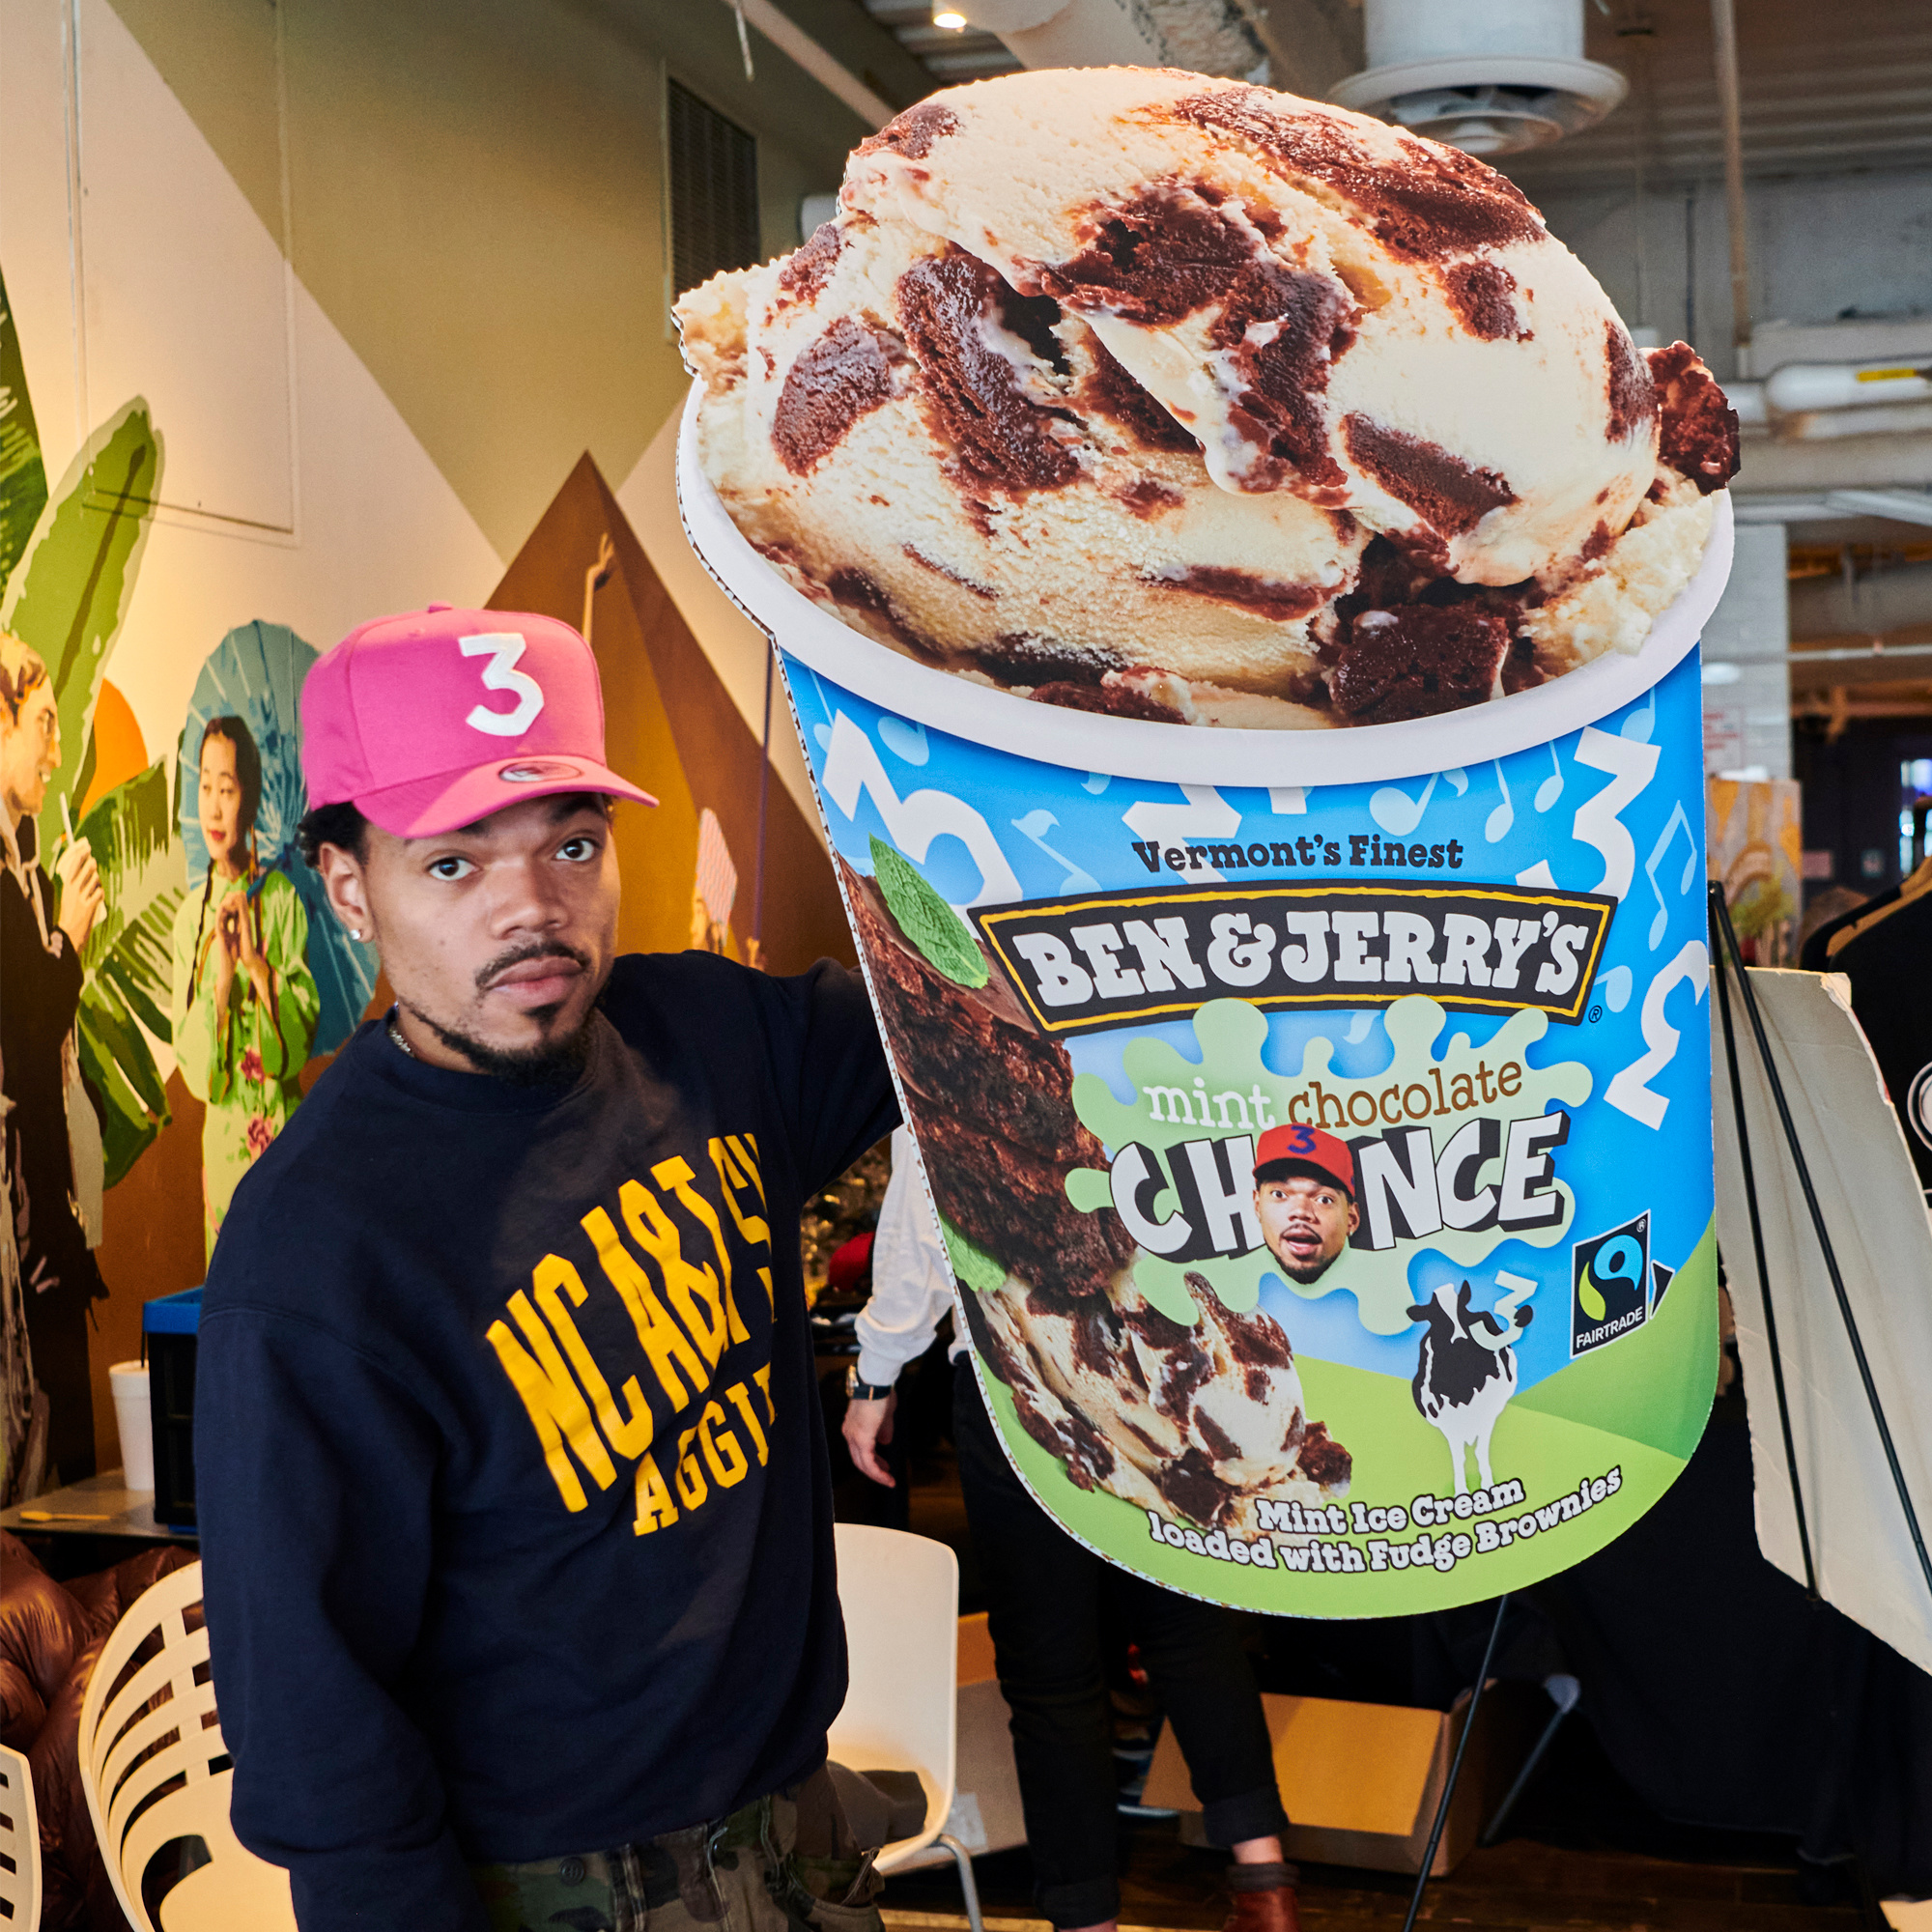 Chance the Rapper uses his Ben & Jerry's flavor, Mint Chocolate Chance, to benefit his non profit SocialWorks